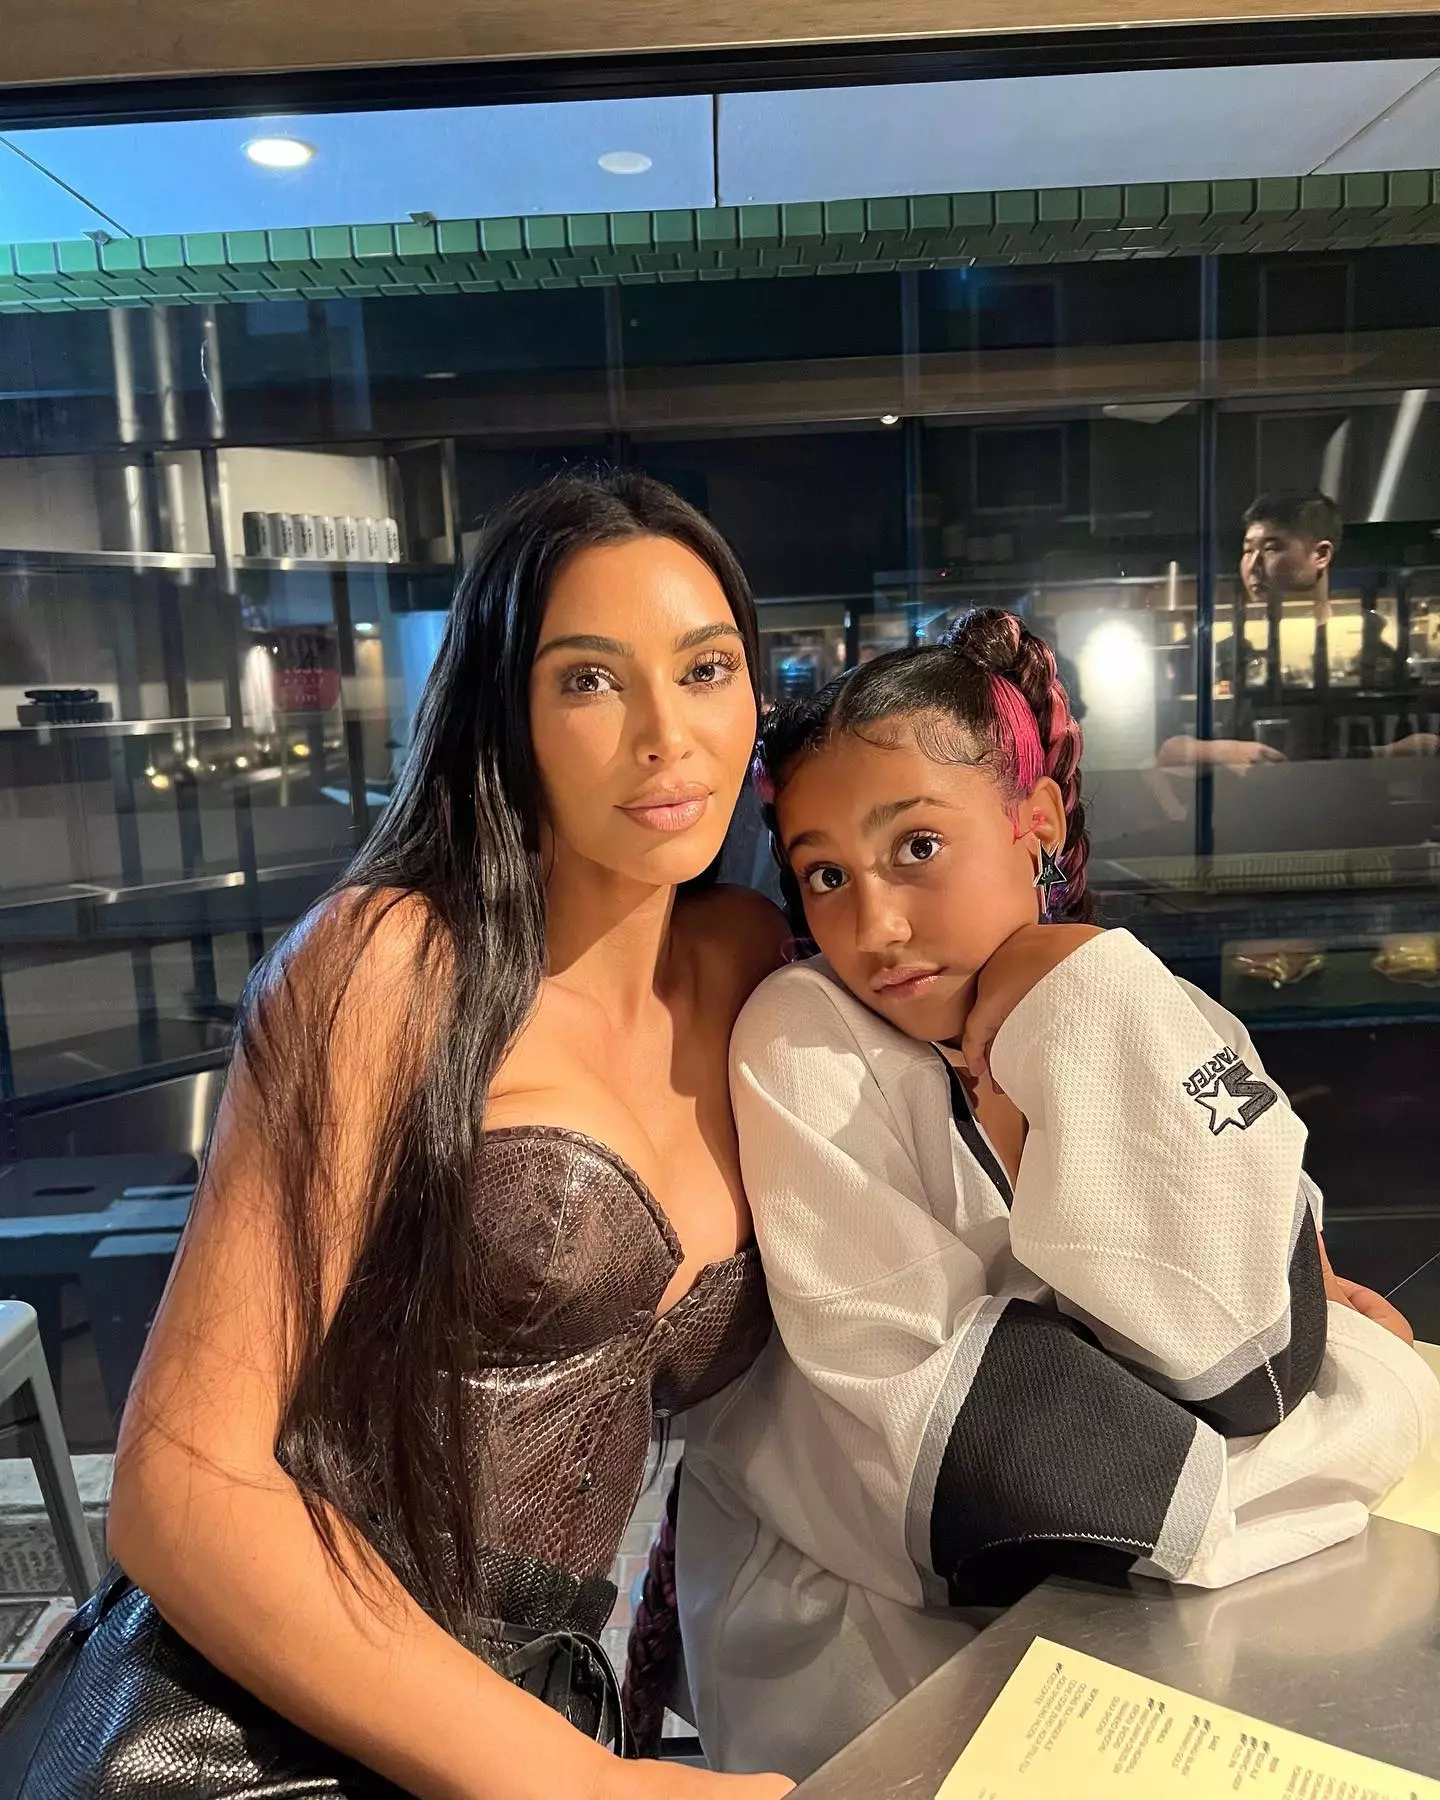 North recently announced her debut album.